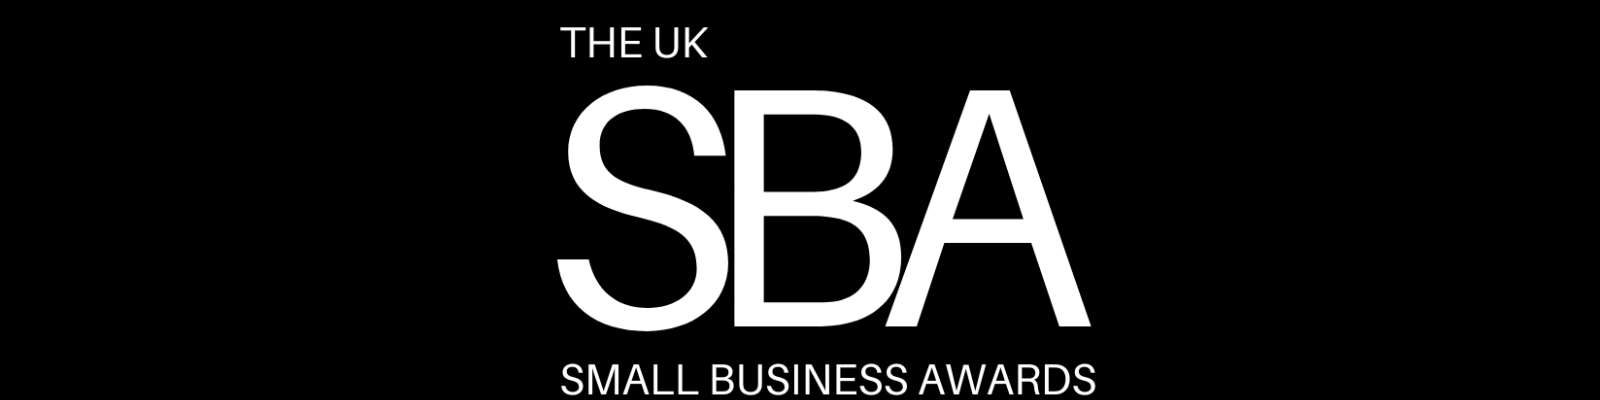 The UK Small Business Awards